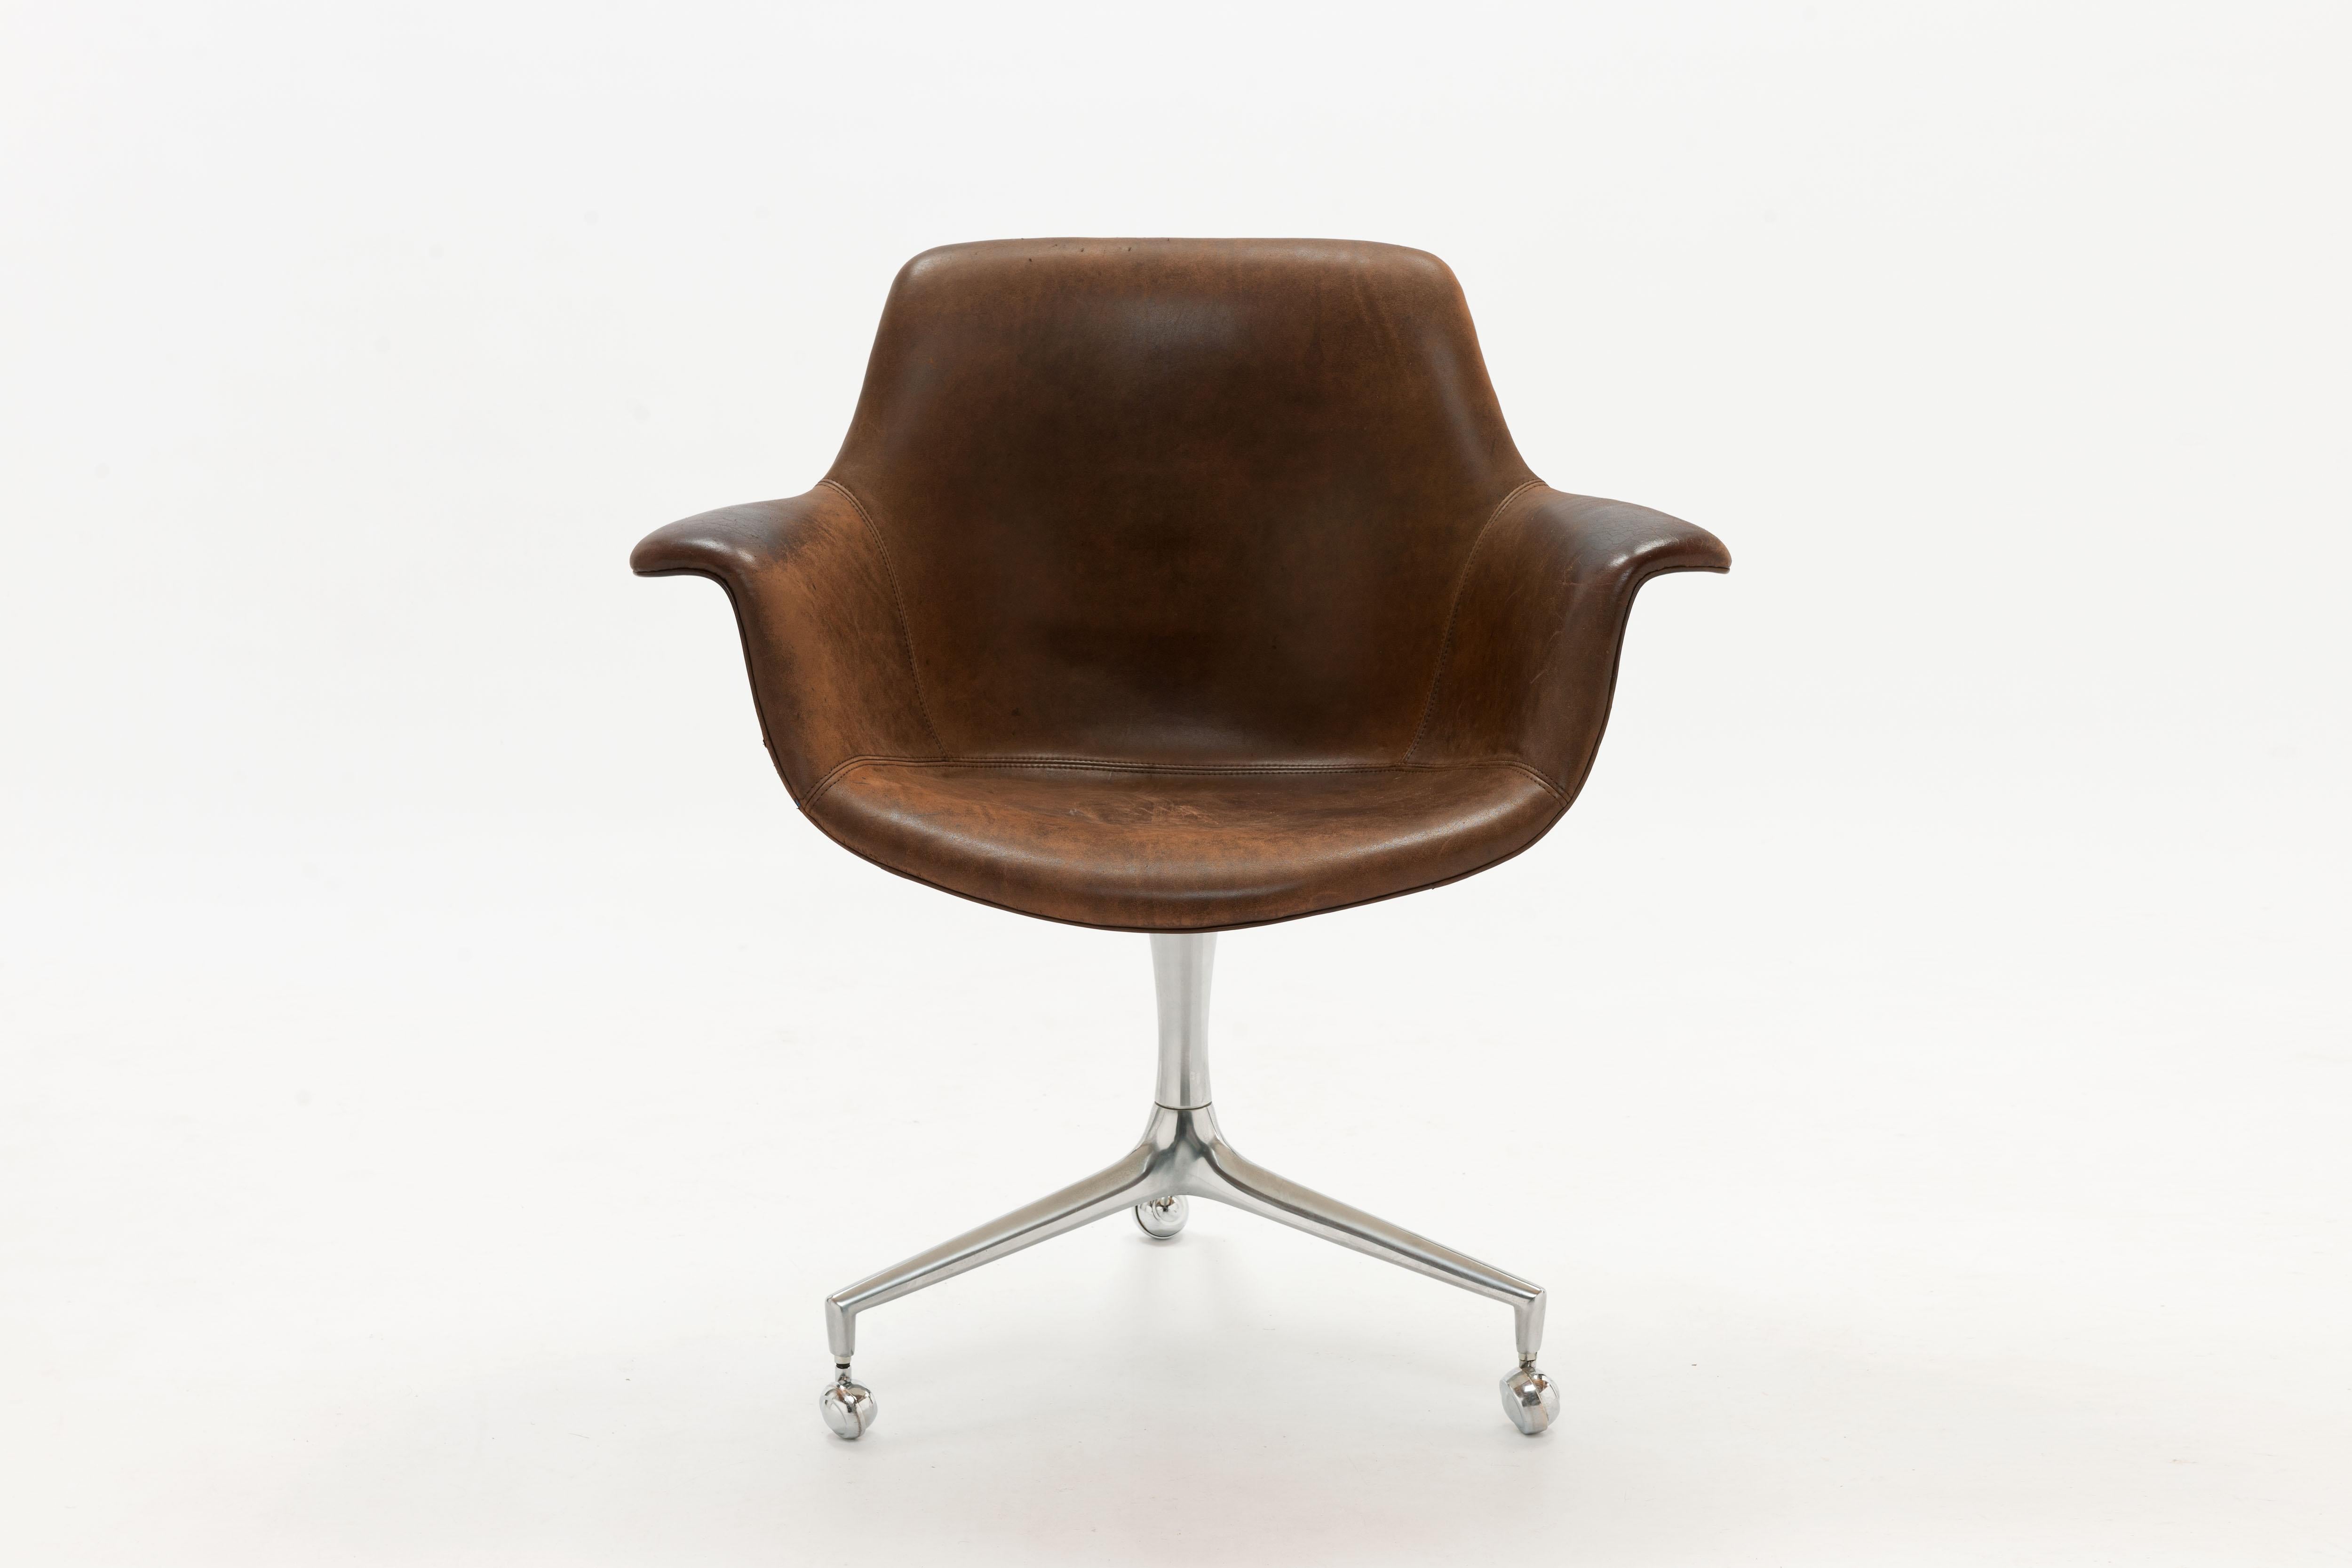 Rare desk chair model FK 810 designed in 1964-1965 by Danish designers Preben Fabricius and Jørgen Kastholm for Alfred Kill, Germany, in all original condition.
The chair is executed with original steel castors and a dark brown leather upholstery